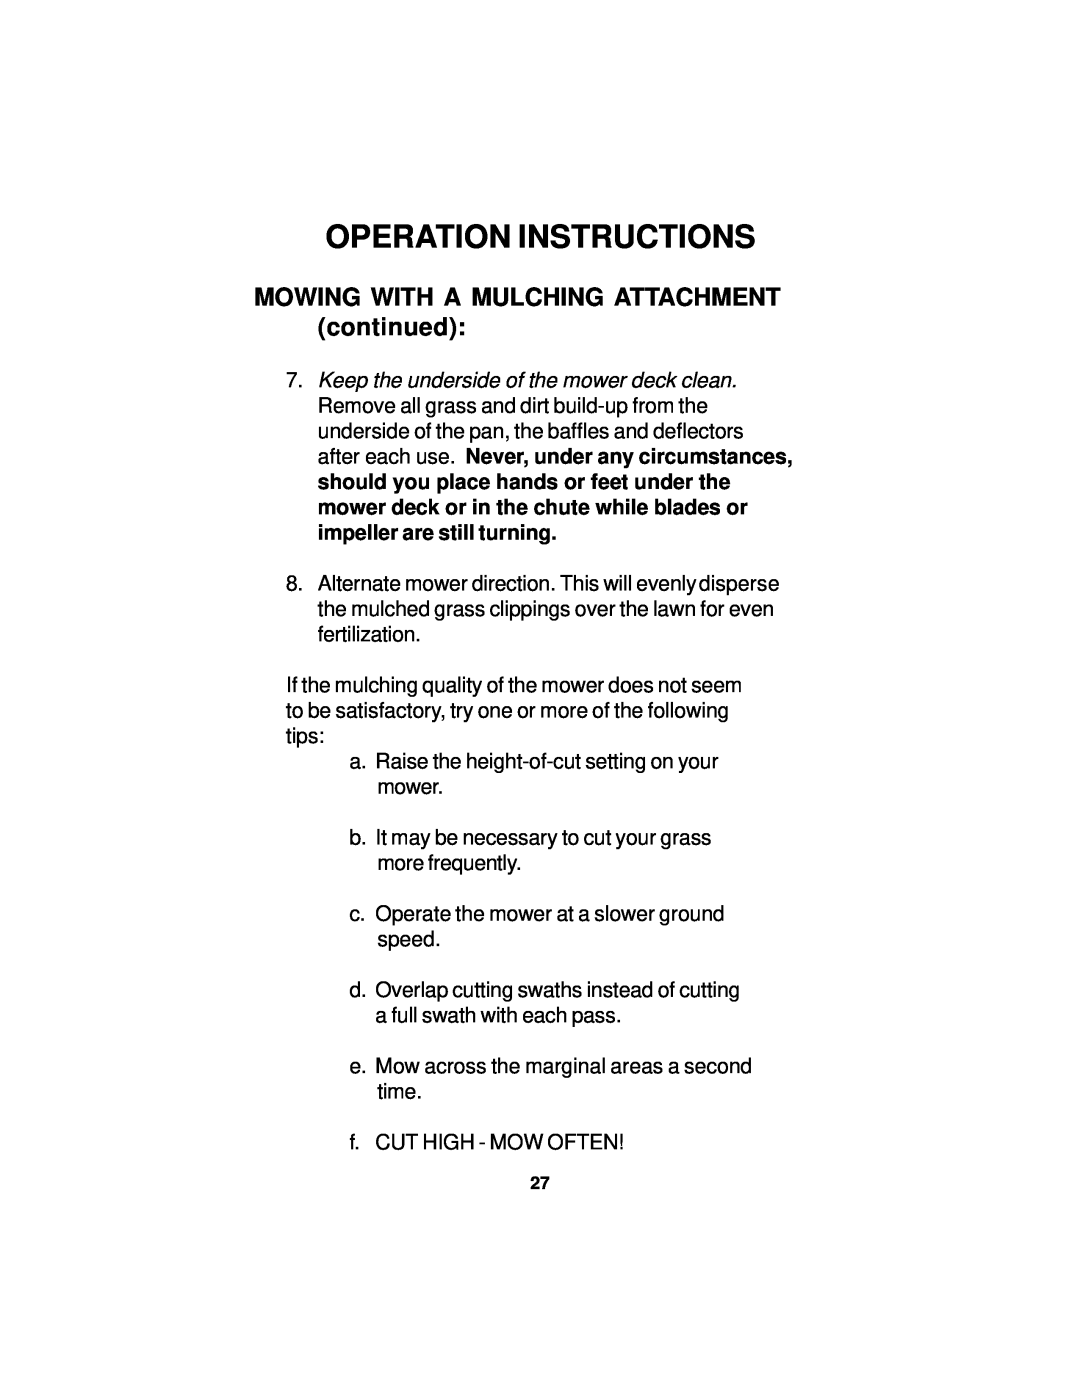 Dixon 18124-0804 manual MOWING WITH A MULCHING ATTACHMENT continued, Operation Instructions 